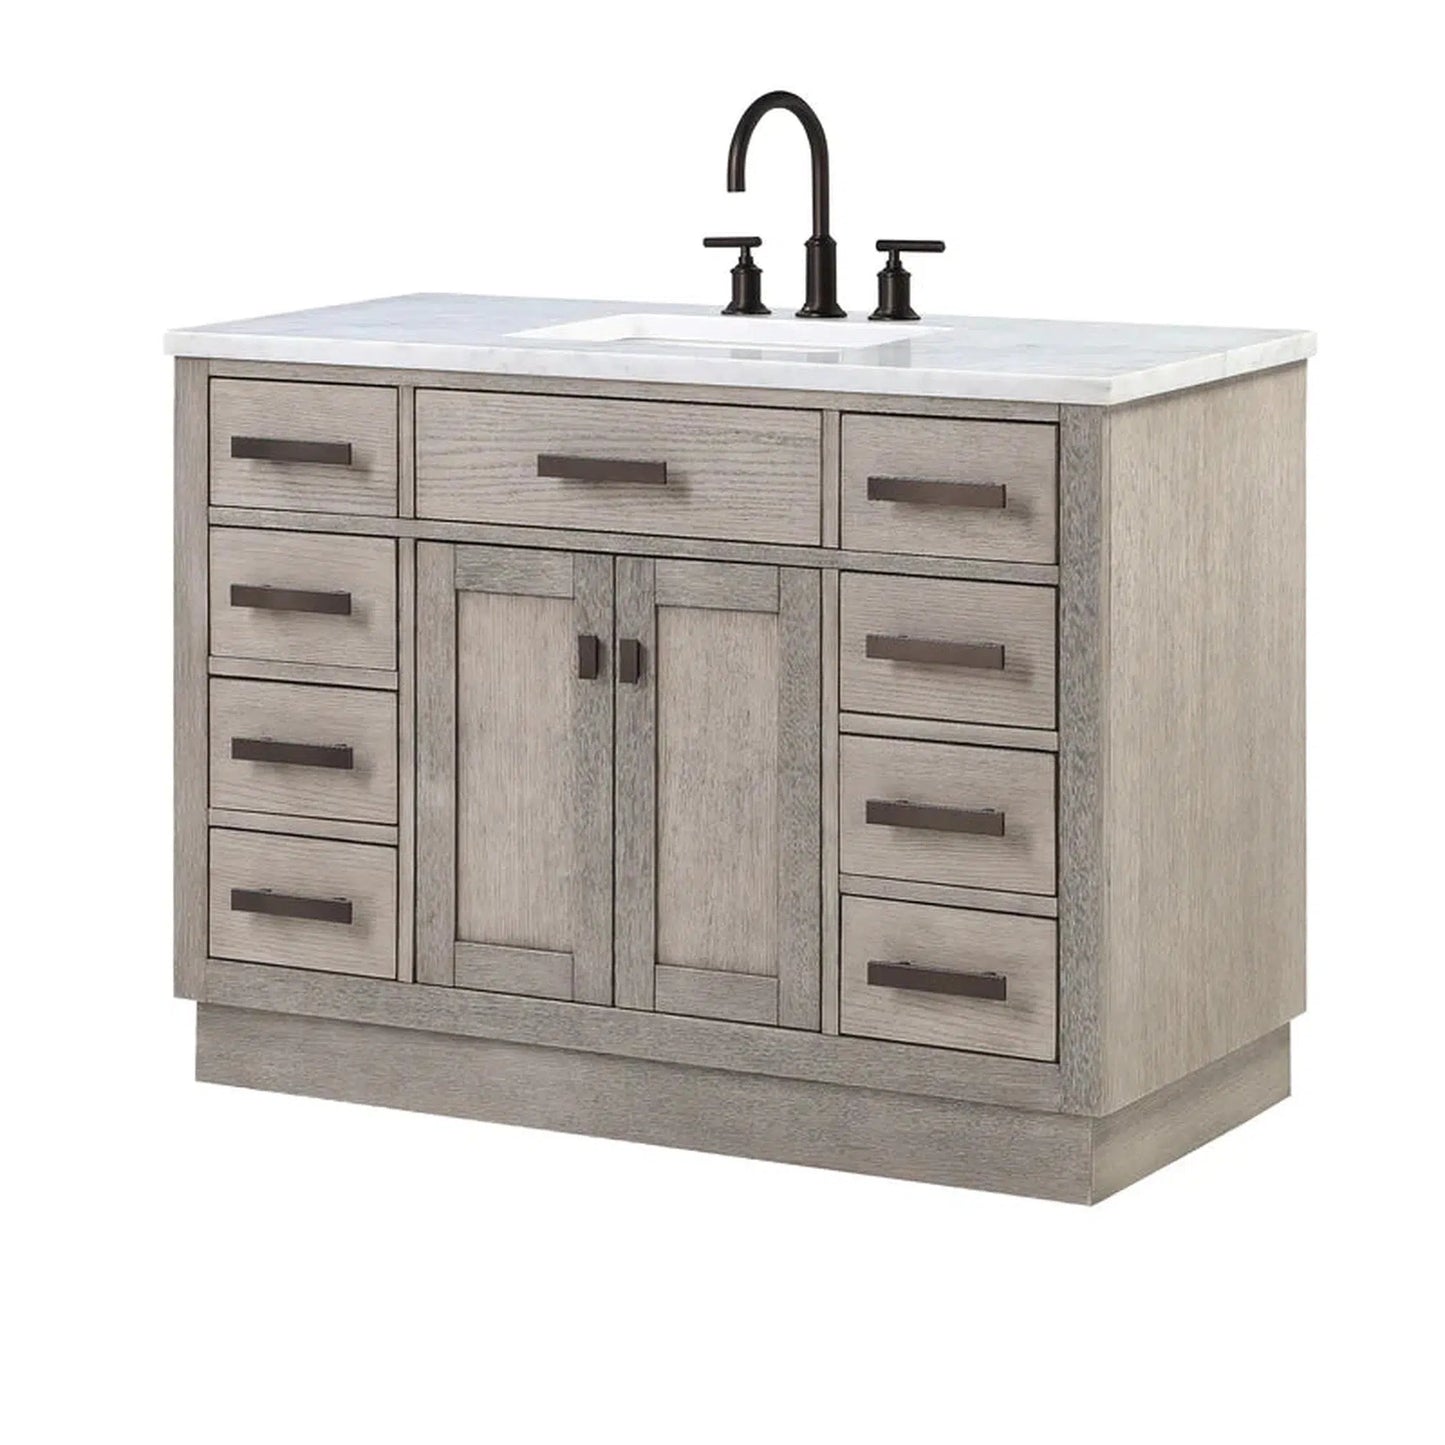 Water Creation Chestnut 48" Single Sink Carrara White Marble Countertop Vanity In Grey Oak with Grooseneck Faucet and Mirror